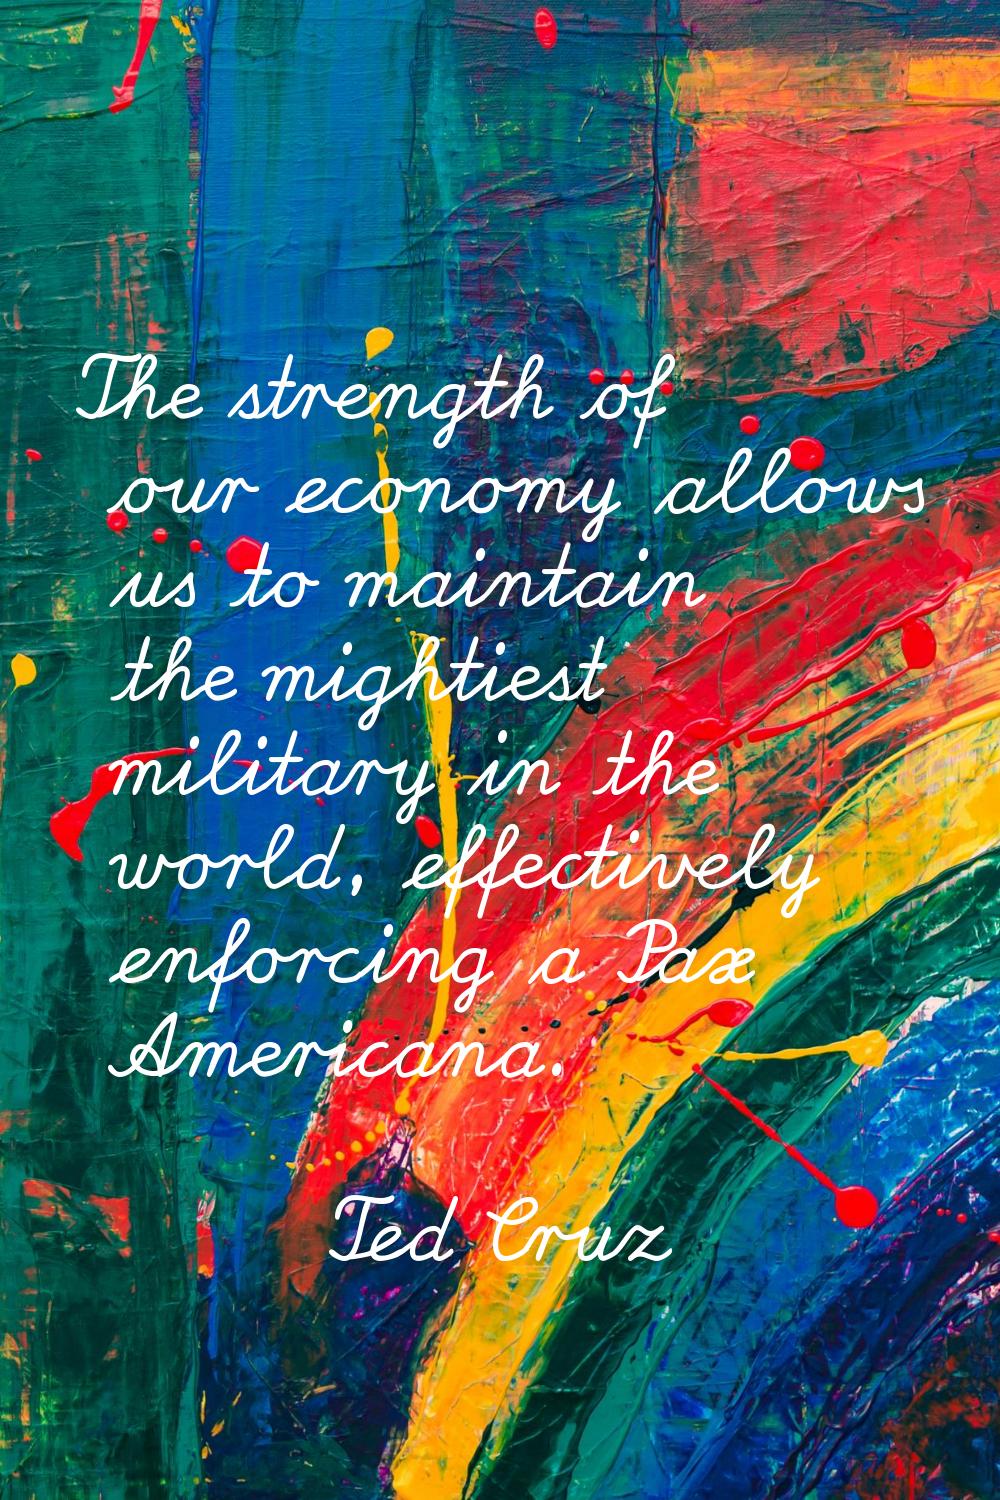 The strength of our economy allows us to maintain the mightiest military in the world, effectively 